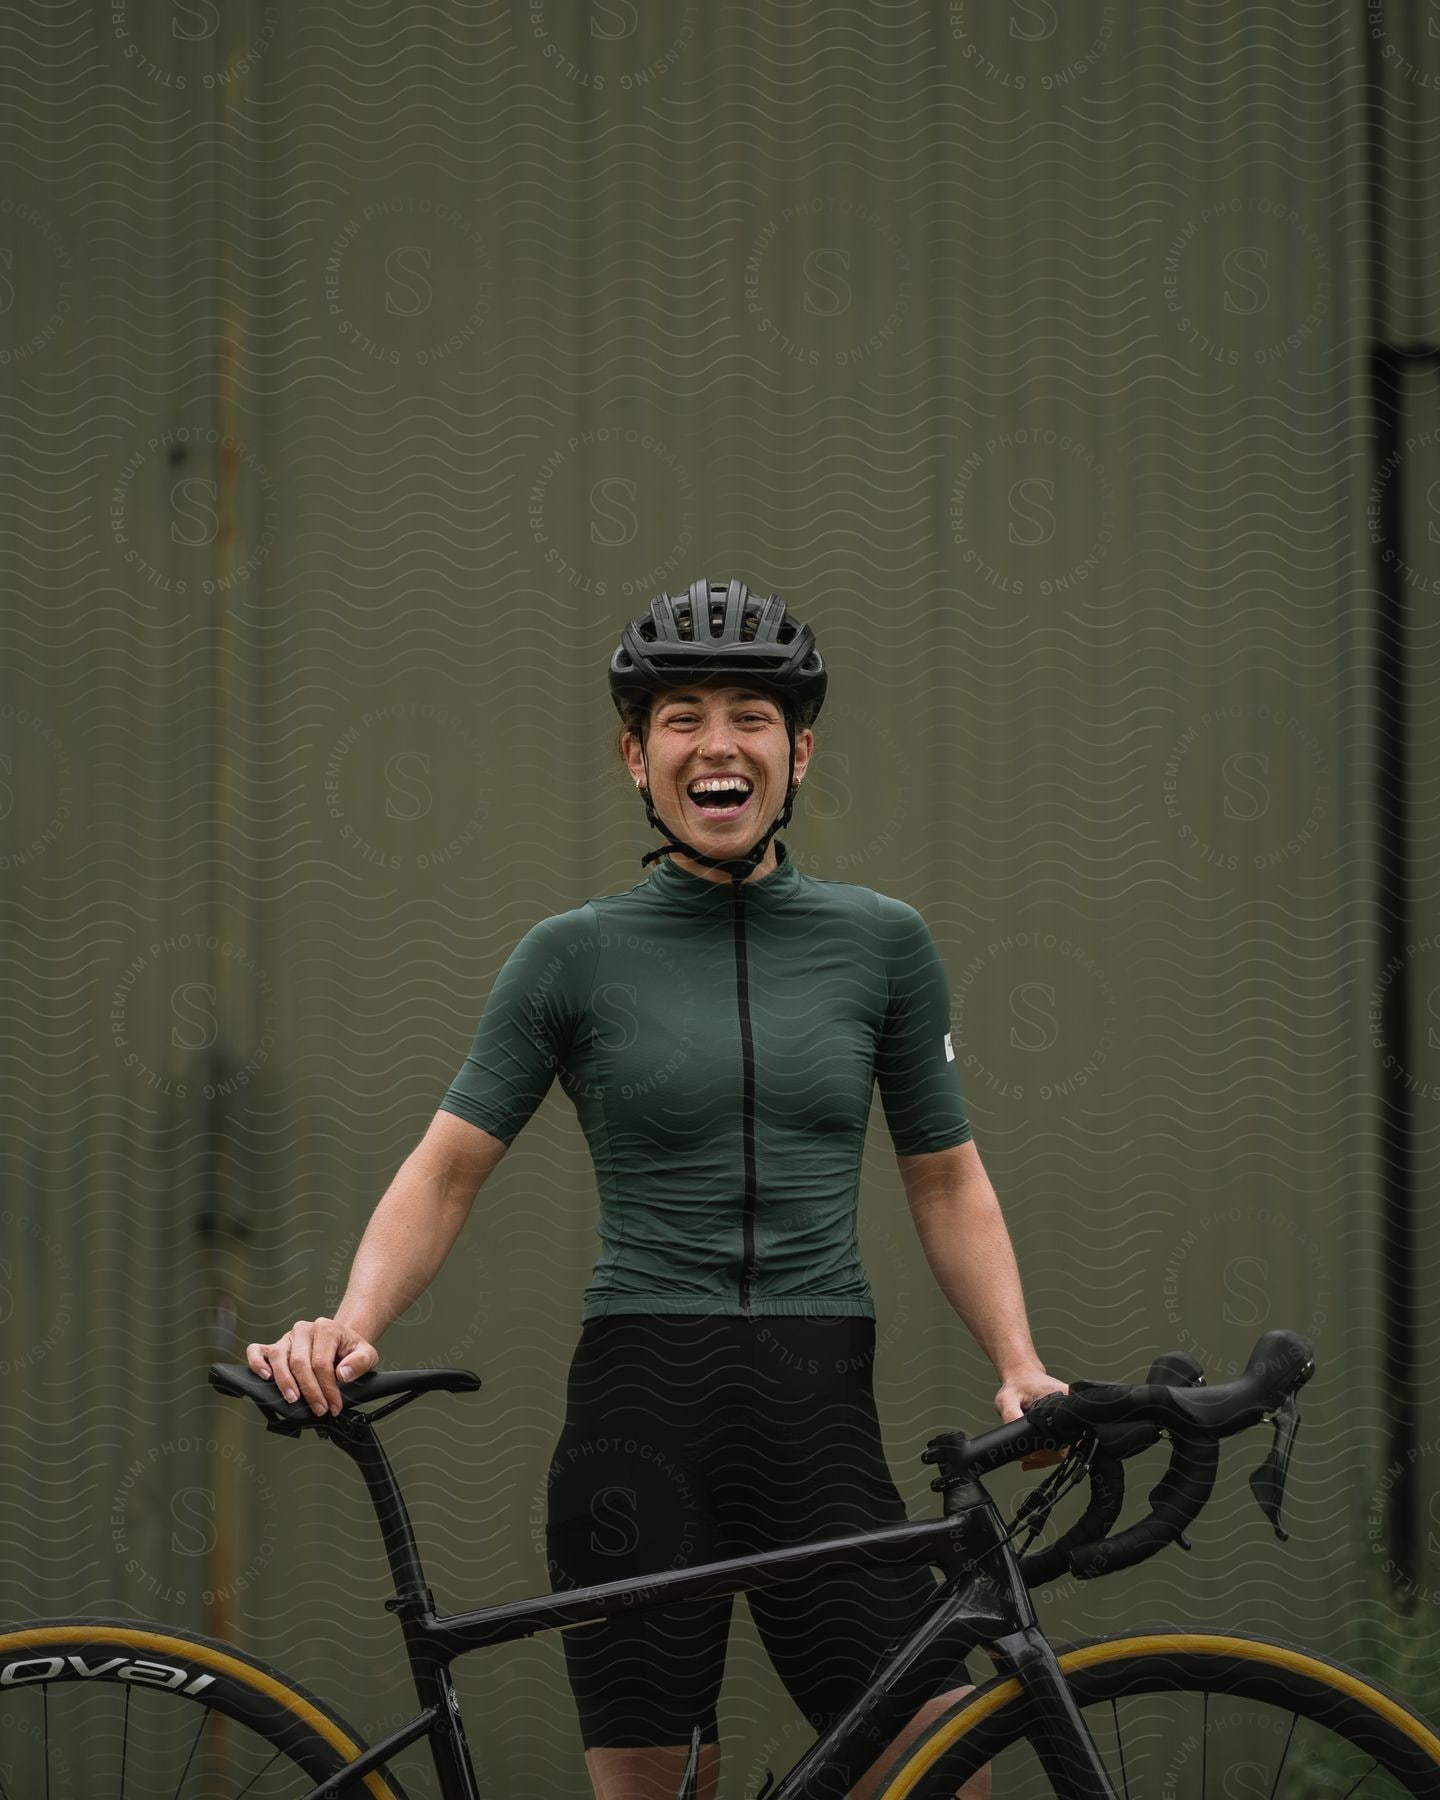 Smiling woman with cycling equipment in front holding her bicycle